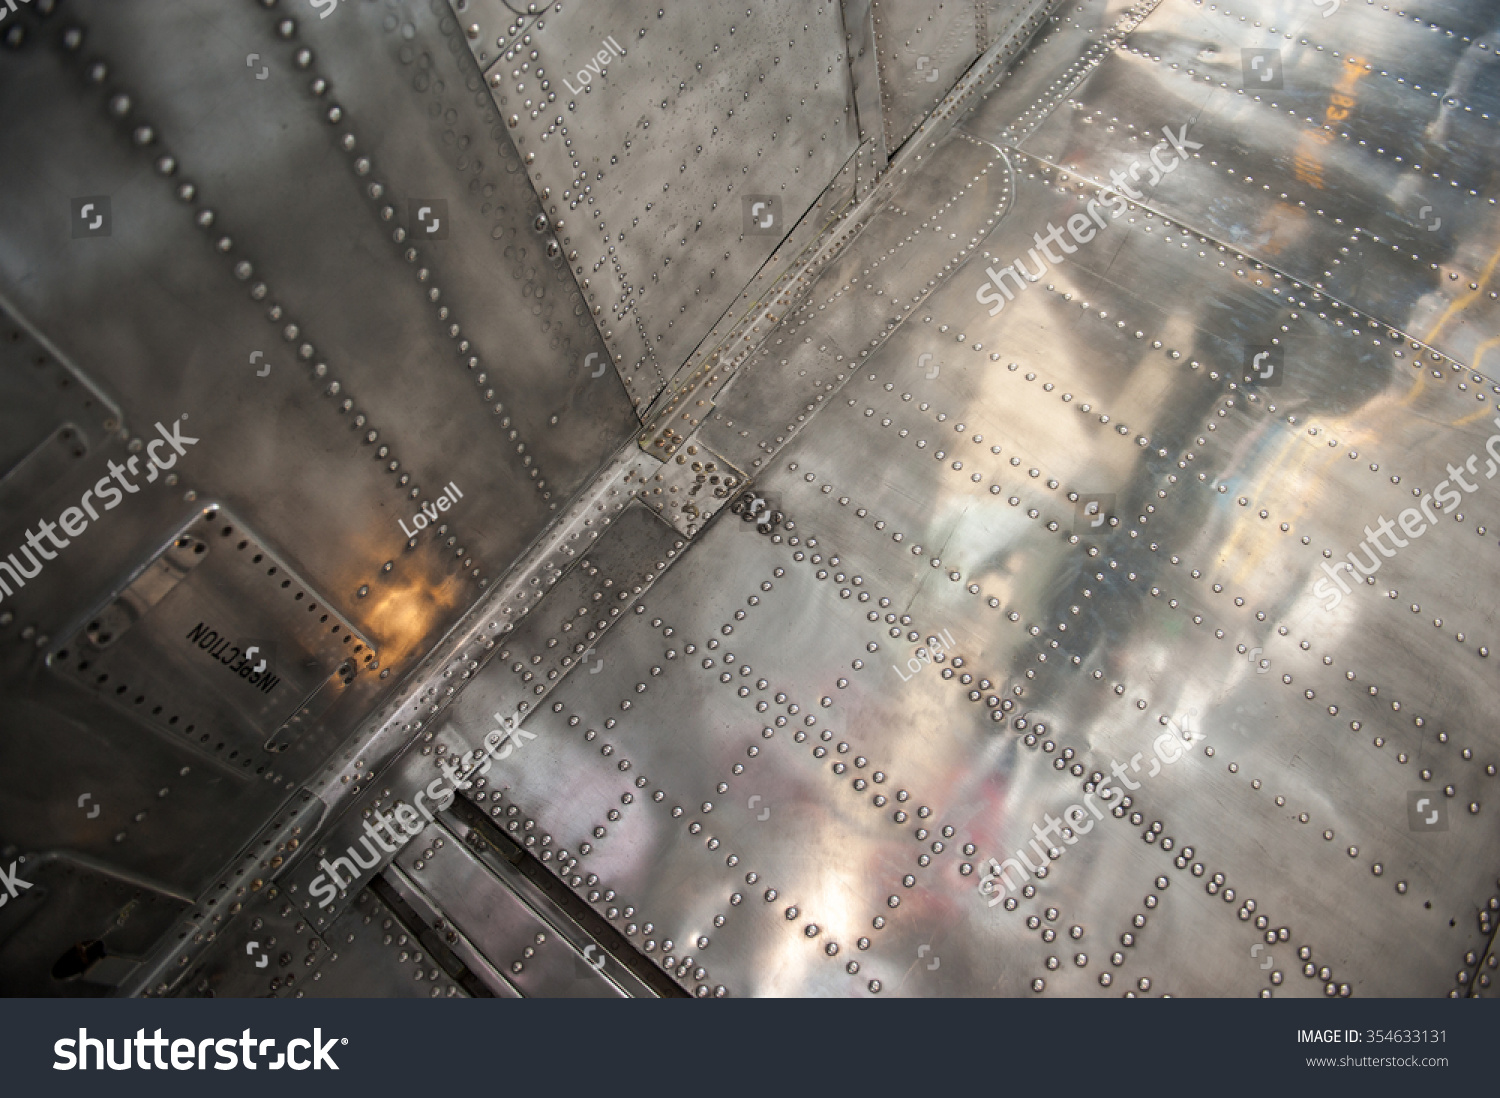 military aircraft close up of outer silver body and rivets #354633131